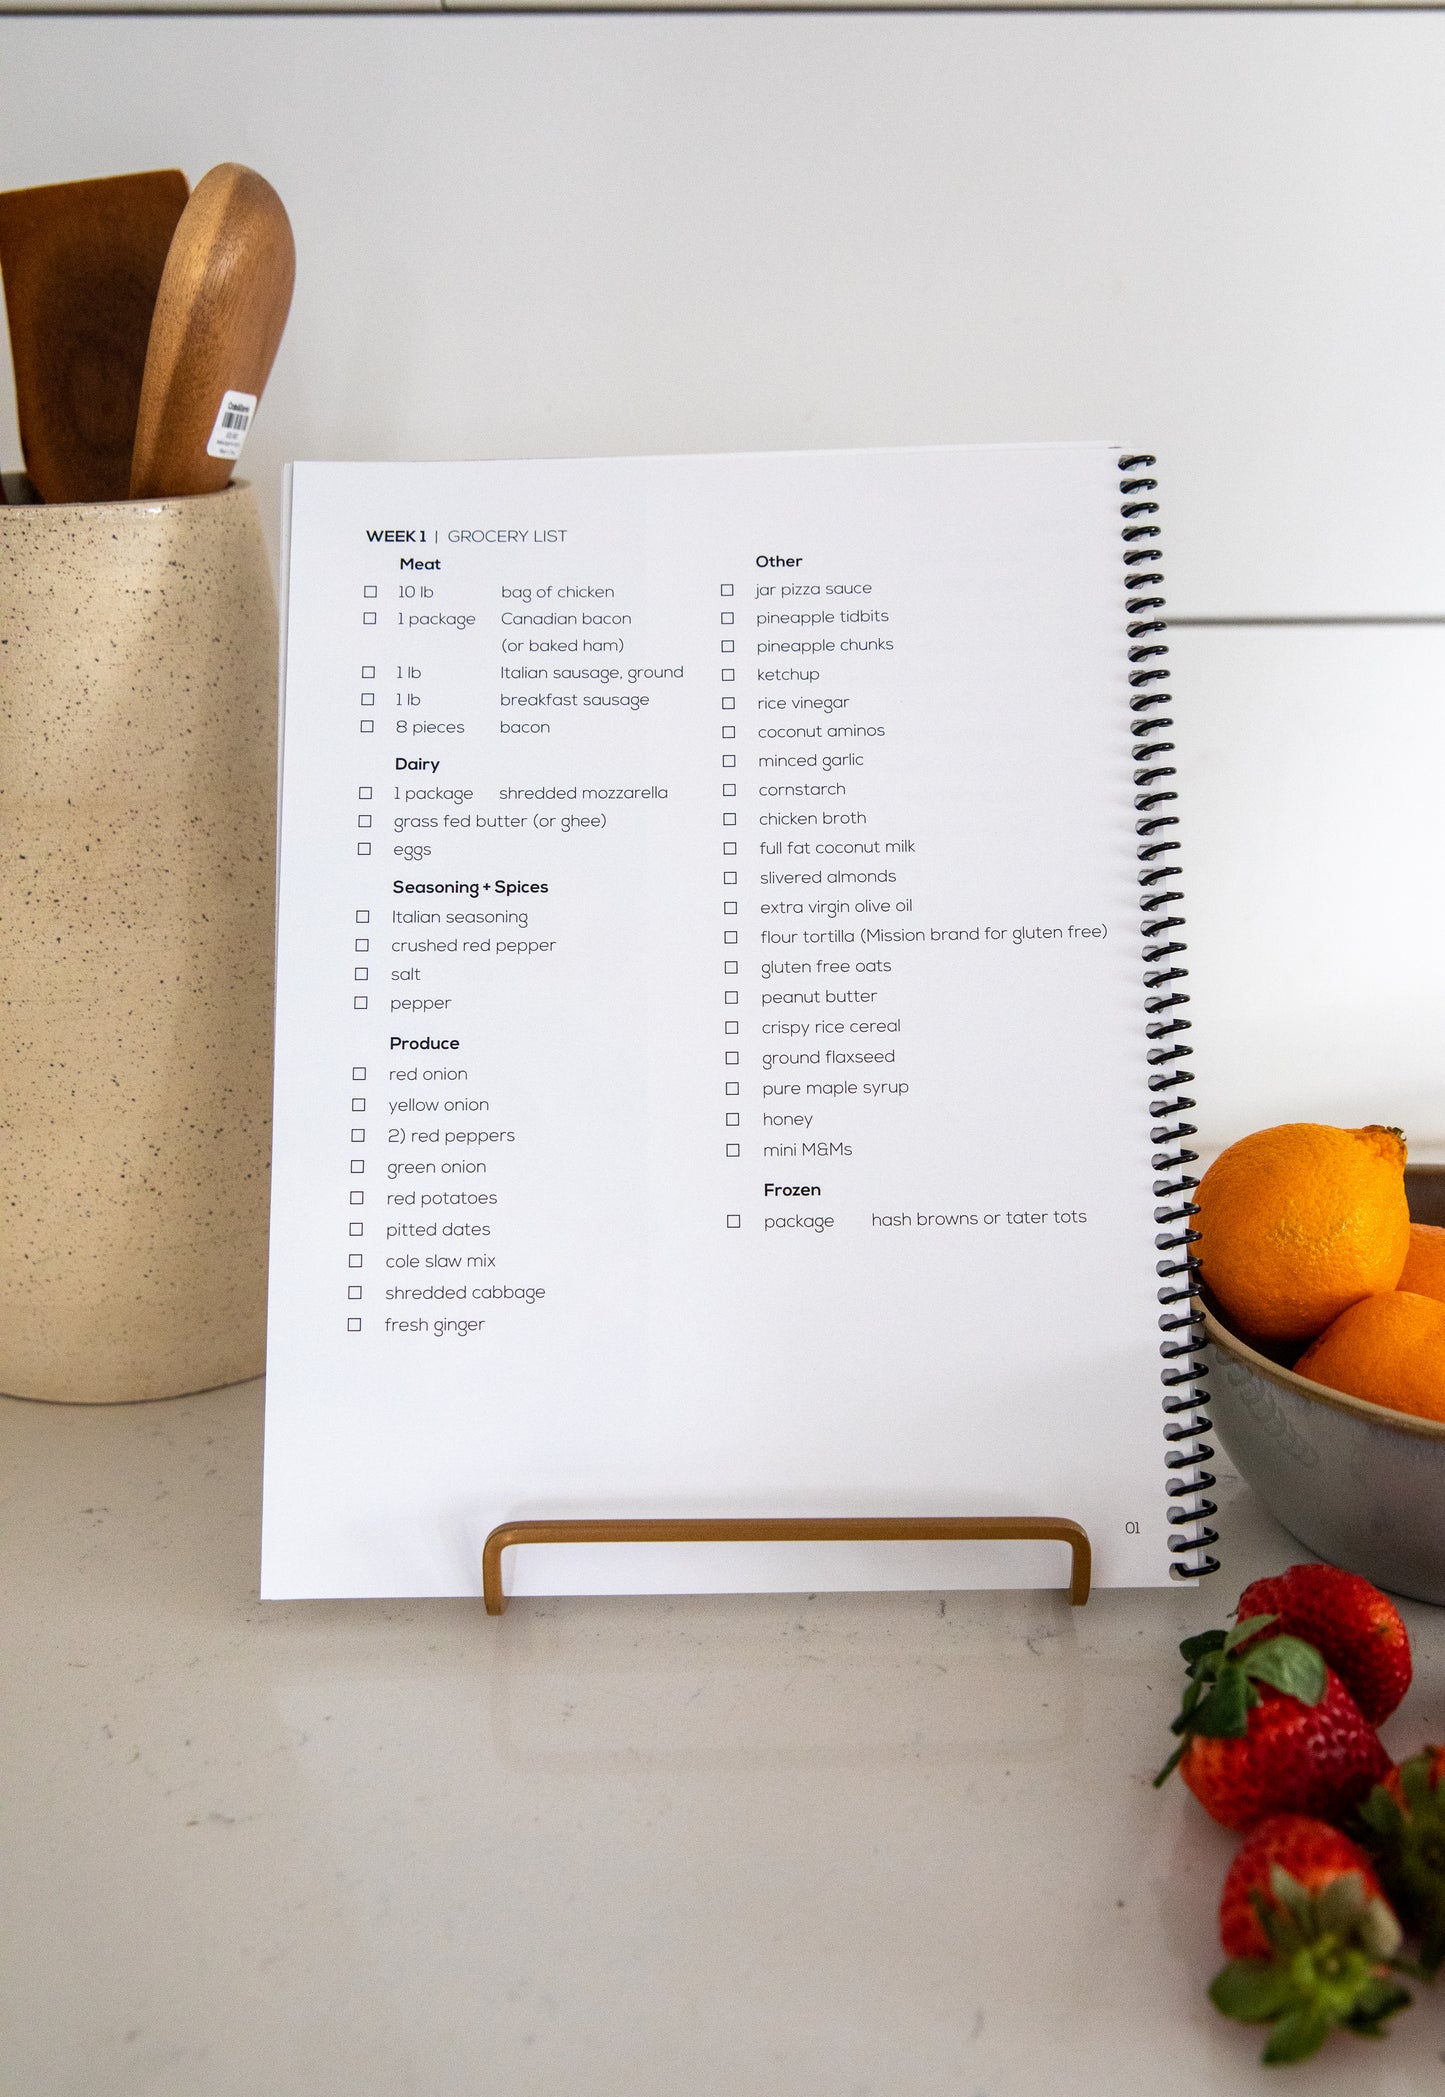 (Printed) Edition 3- with 4 Weeks of Meals Plans + Grocery Lists + New Seasoning Guide